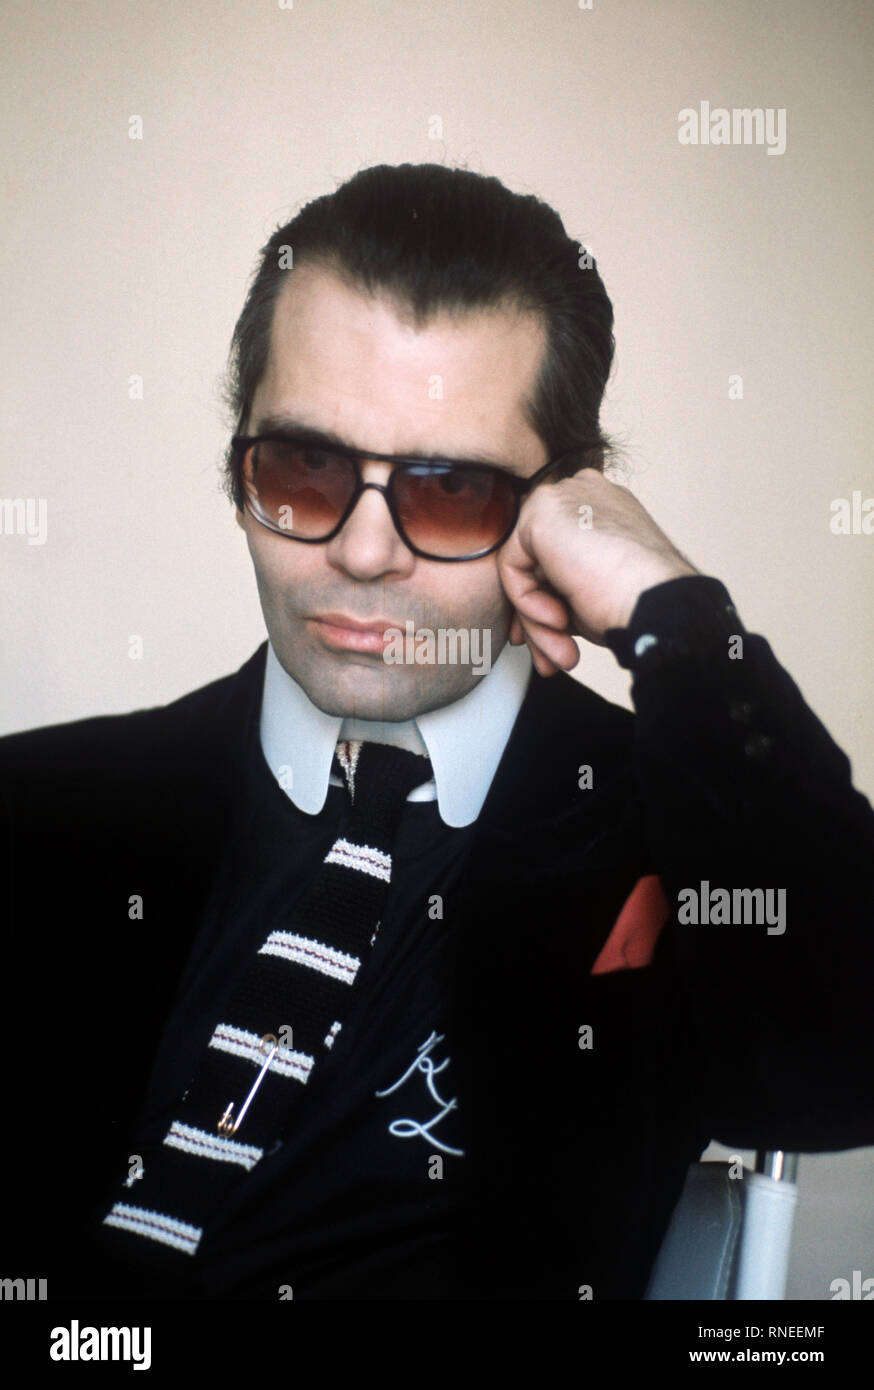 FILED - 01 March 1979, France (France), Paris: The German fashion designer Karl  Lagerfeld in his studio. The German fashion designer Karl Lagerfeld has  died. Chanel announced this on 19.02.2019 in Lagerfeld's